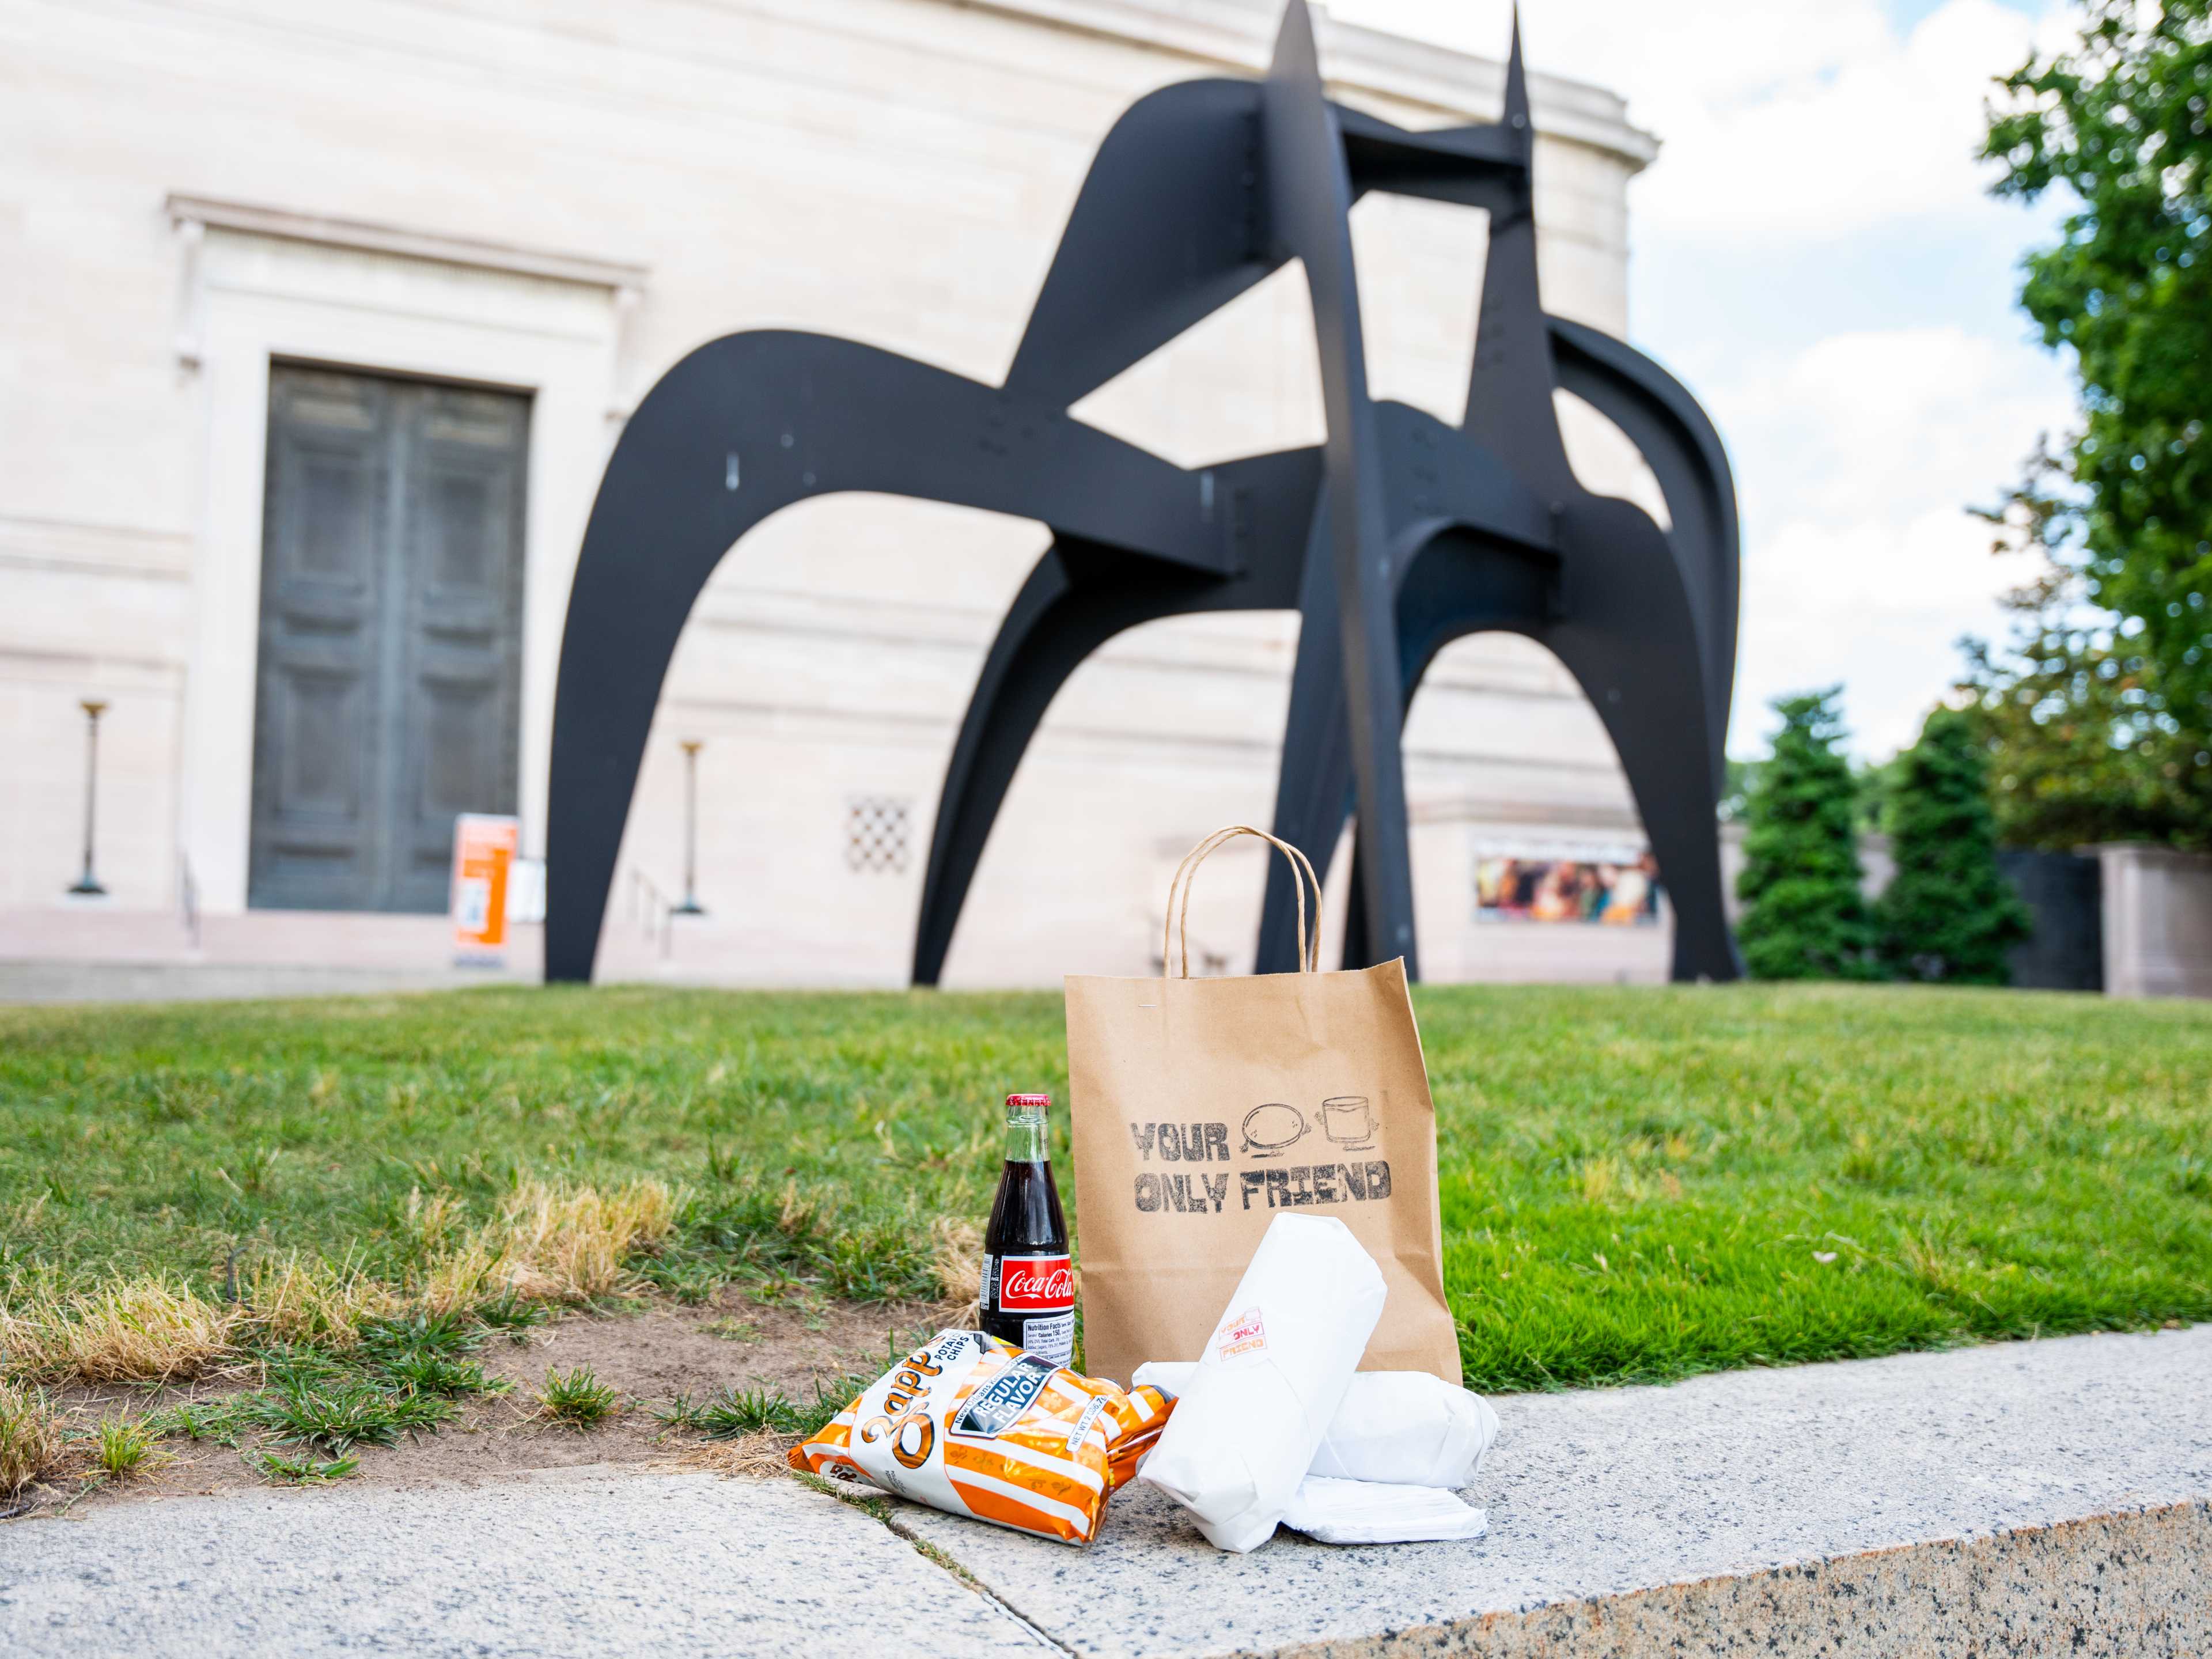 soda, sandwiches, and chips on ledge near massive outdoor abstract sculpture